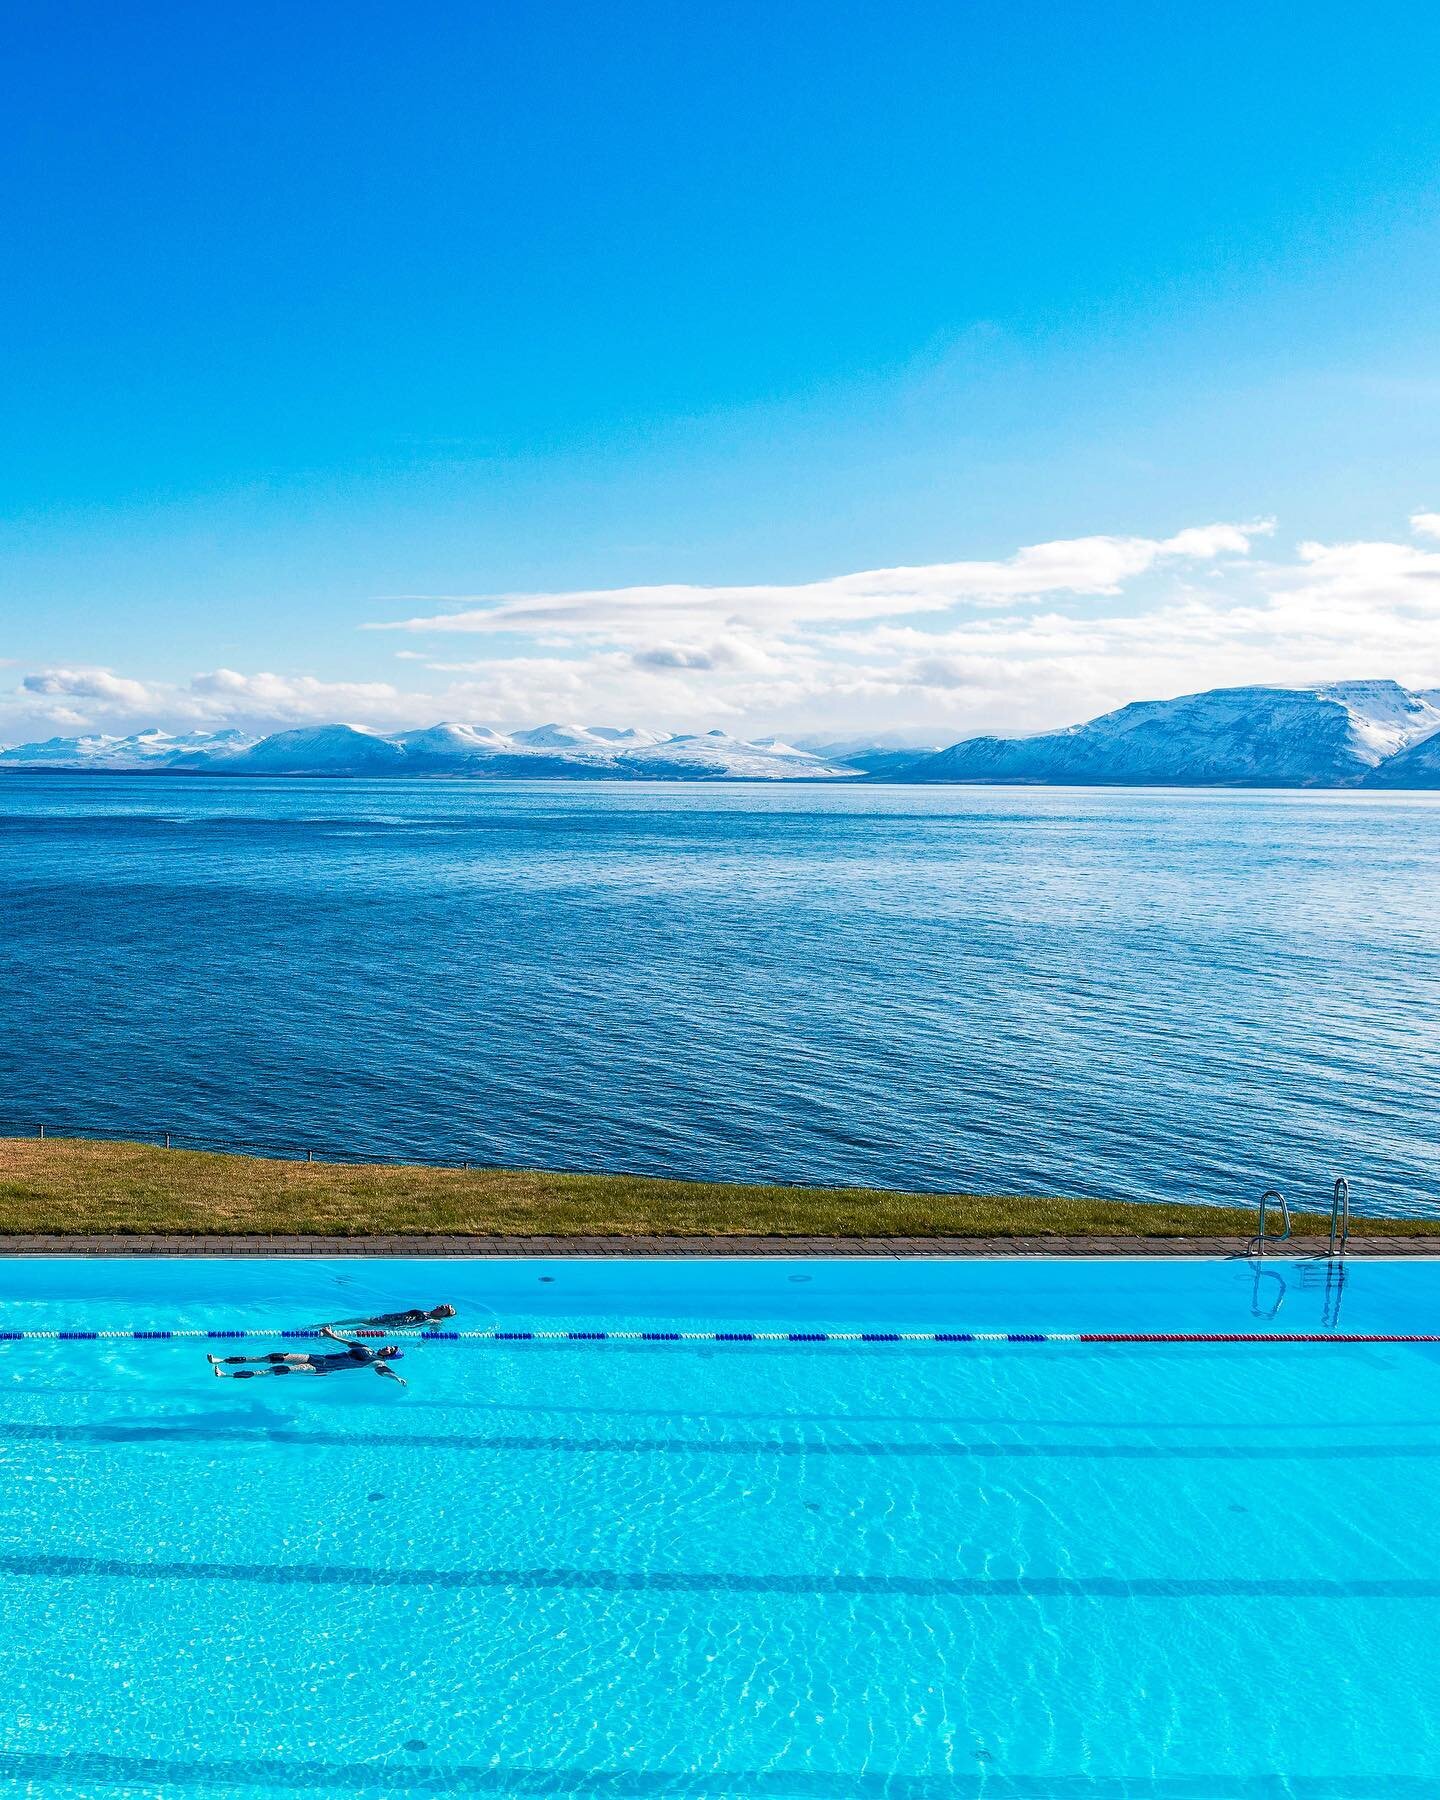 Beautiful swimming pool at Hofsós, Iceland 😍 🇮🇸 overlooking the fjords and blue sea of Skagafjör&eth;ur 🌊 ✨
.
.
#swimvenue #swimming #swimmingpool #hofsos #iceland